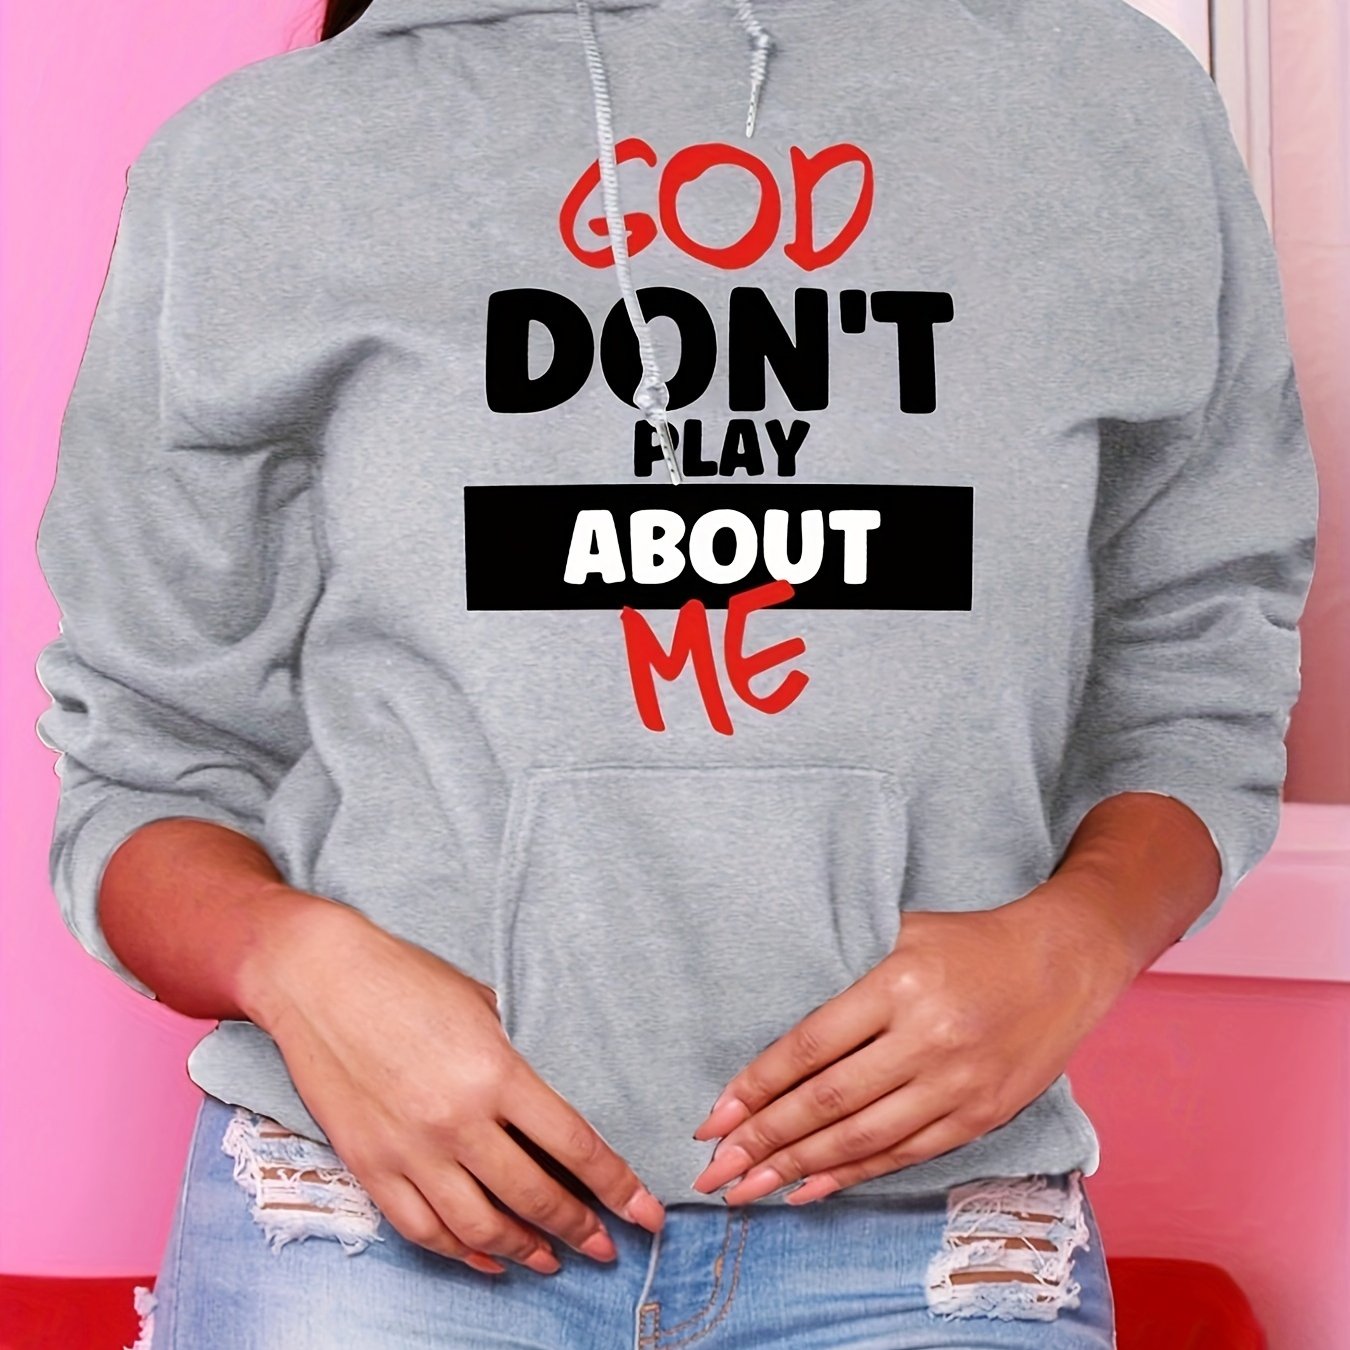 God Don't Play About Me Women's Christian Hooded Pullover Sweatshirt claimedbygoddesigns